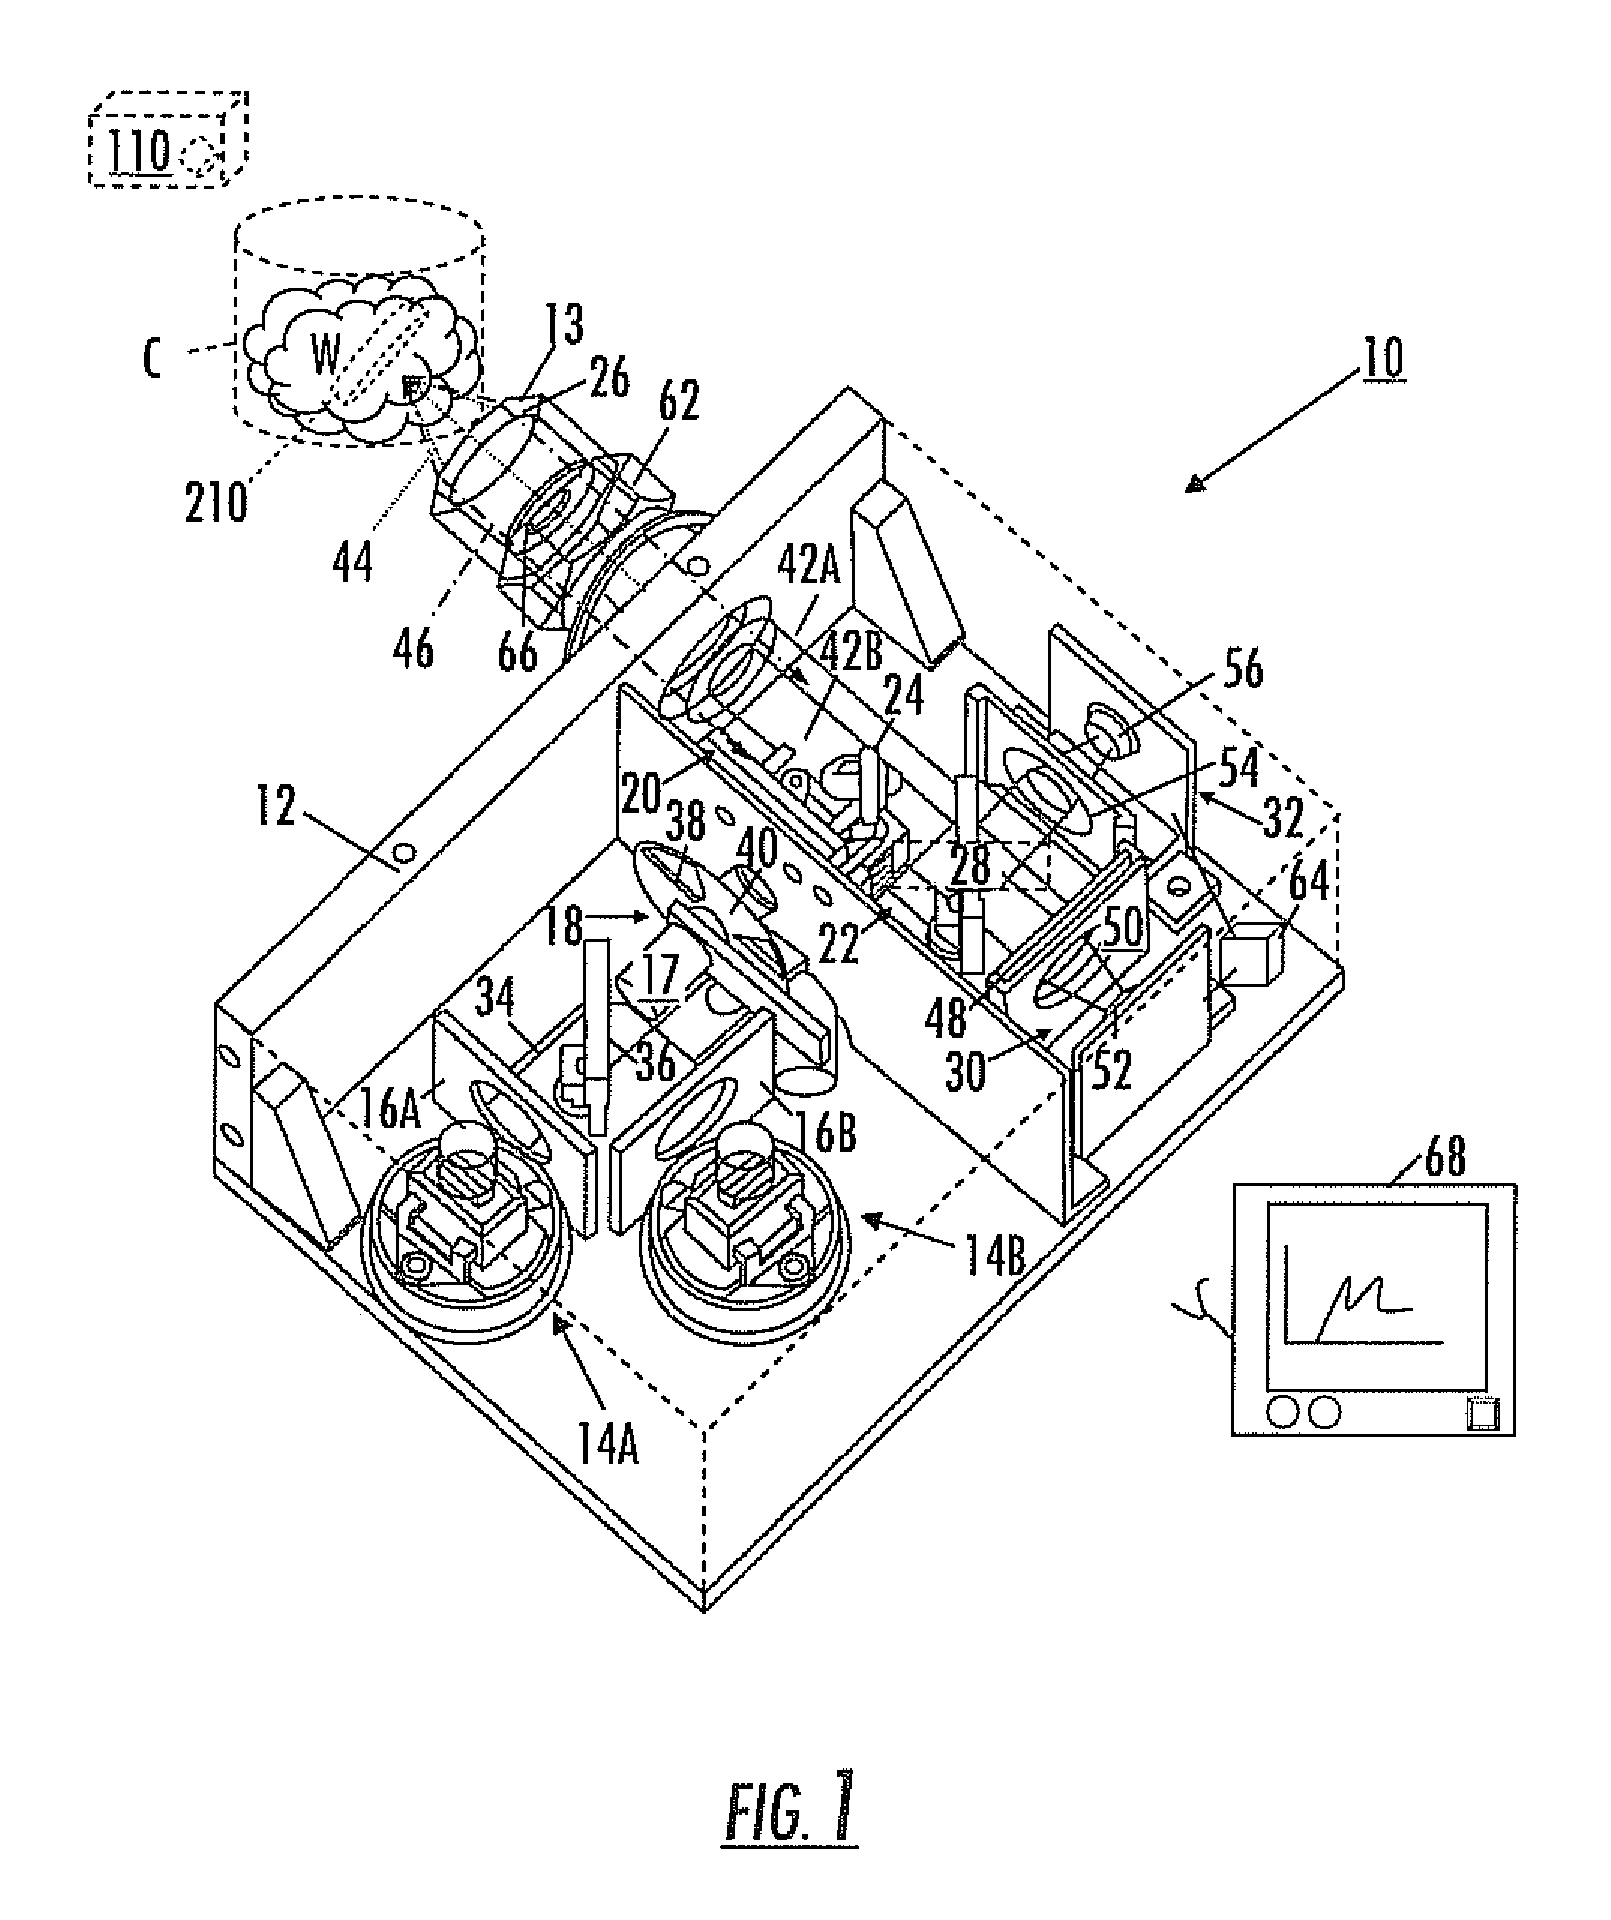 In-line process measurement systems and methods